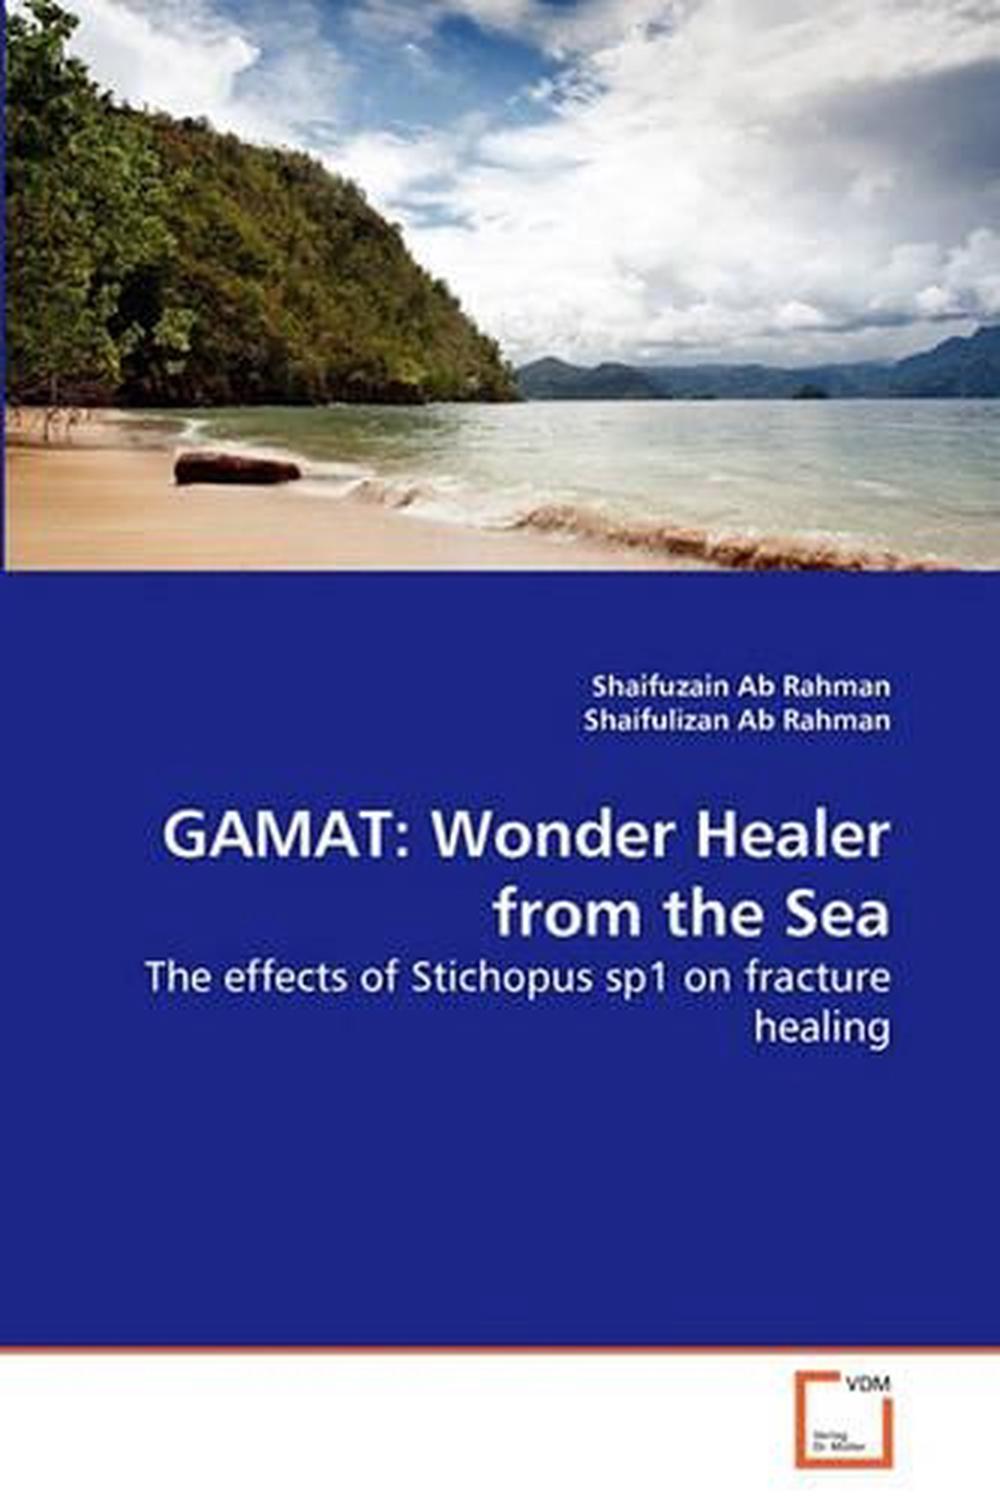 Gamat: The effects of Stichopus sp1 on fracture healing by Shaifuzain Ab Rahman  - Picture 1 of 1